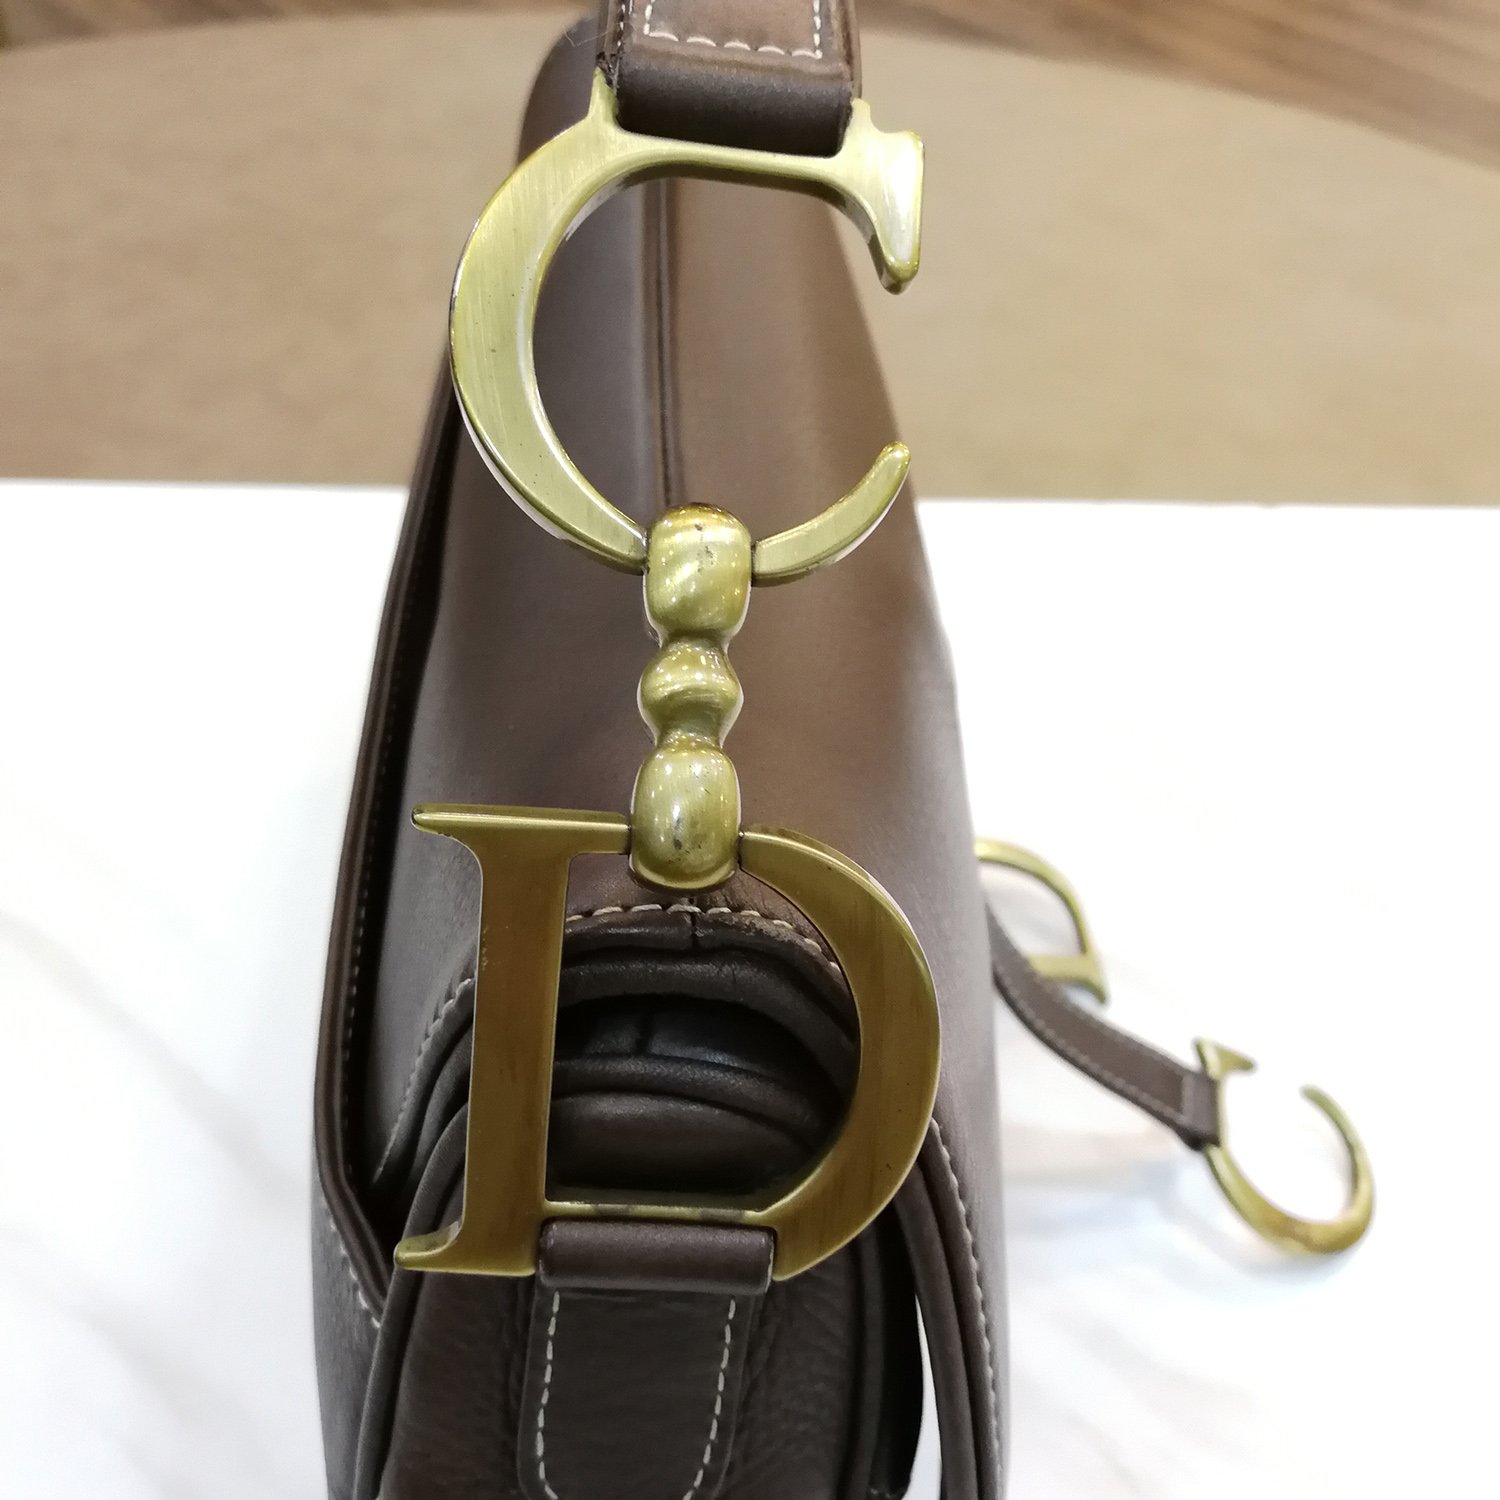 AUTHENTIC Christian Dior Saddle Bag for Sale in Fontana CA  OfferUp